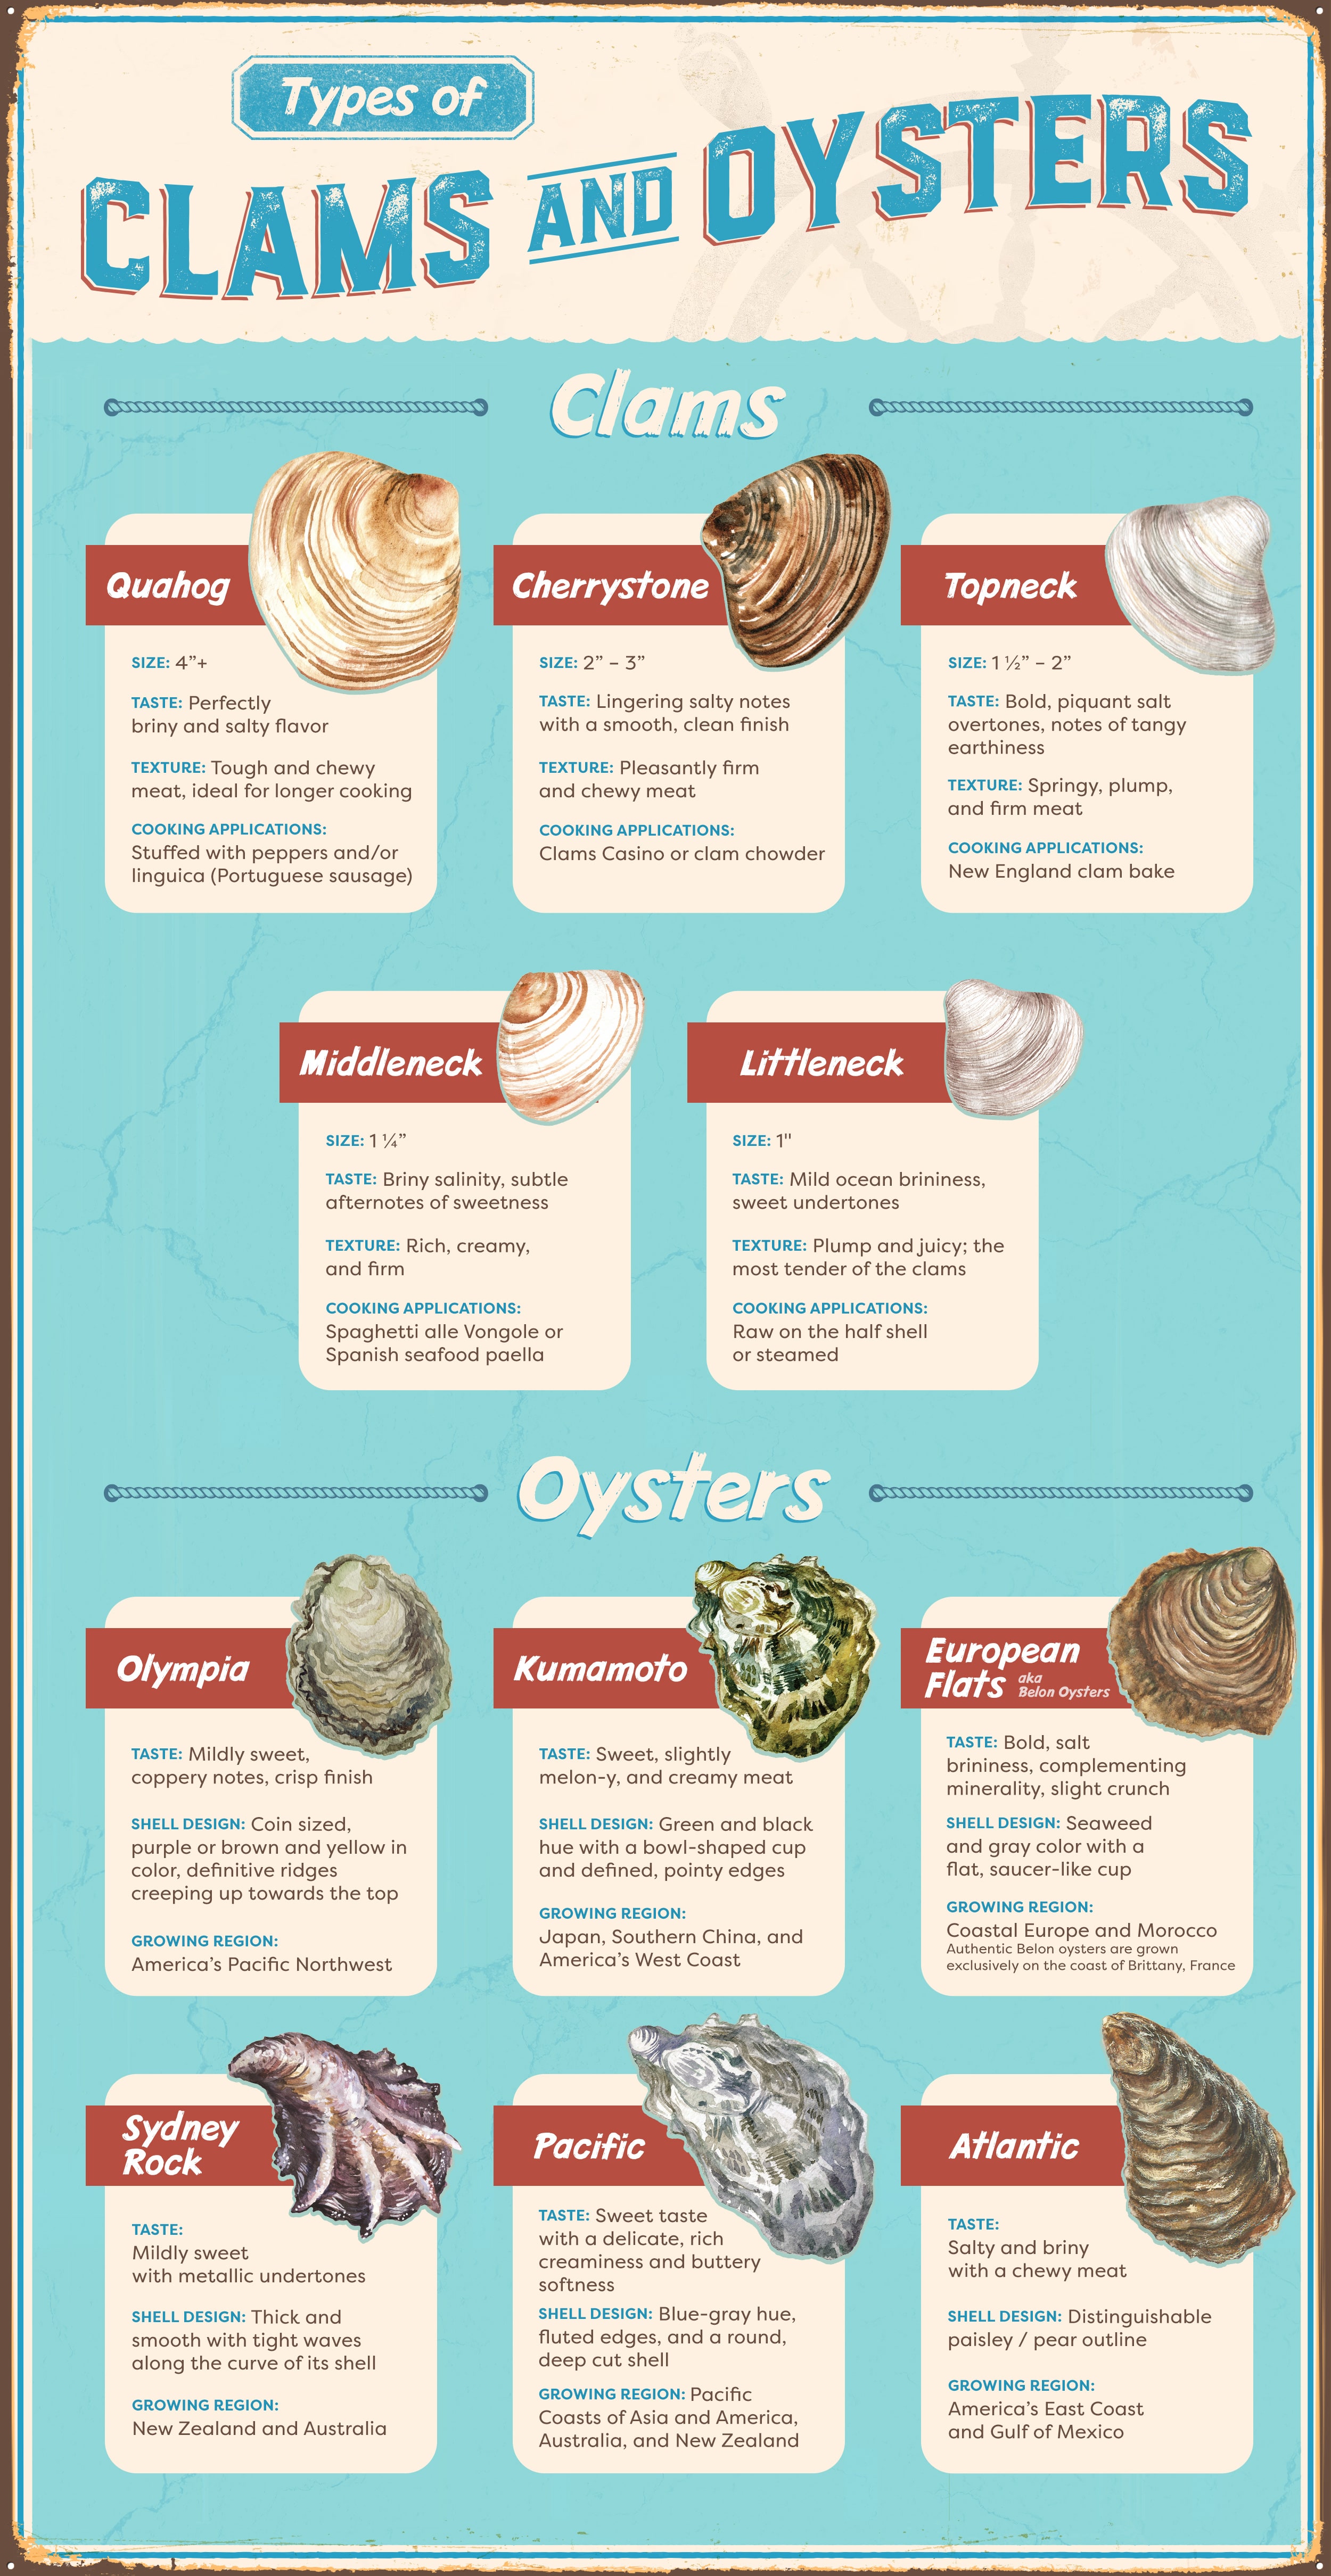 Types of Clams and Oysters Infographic